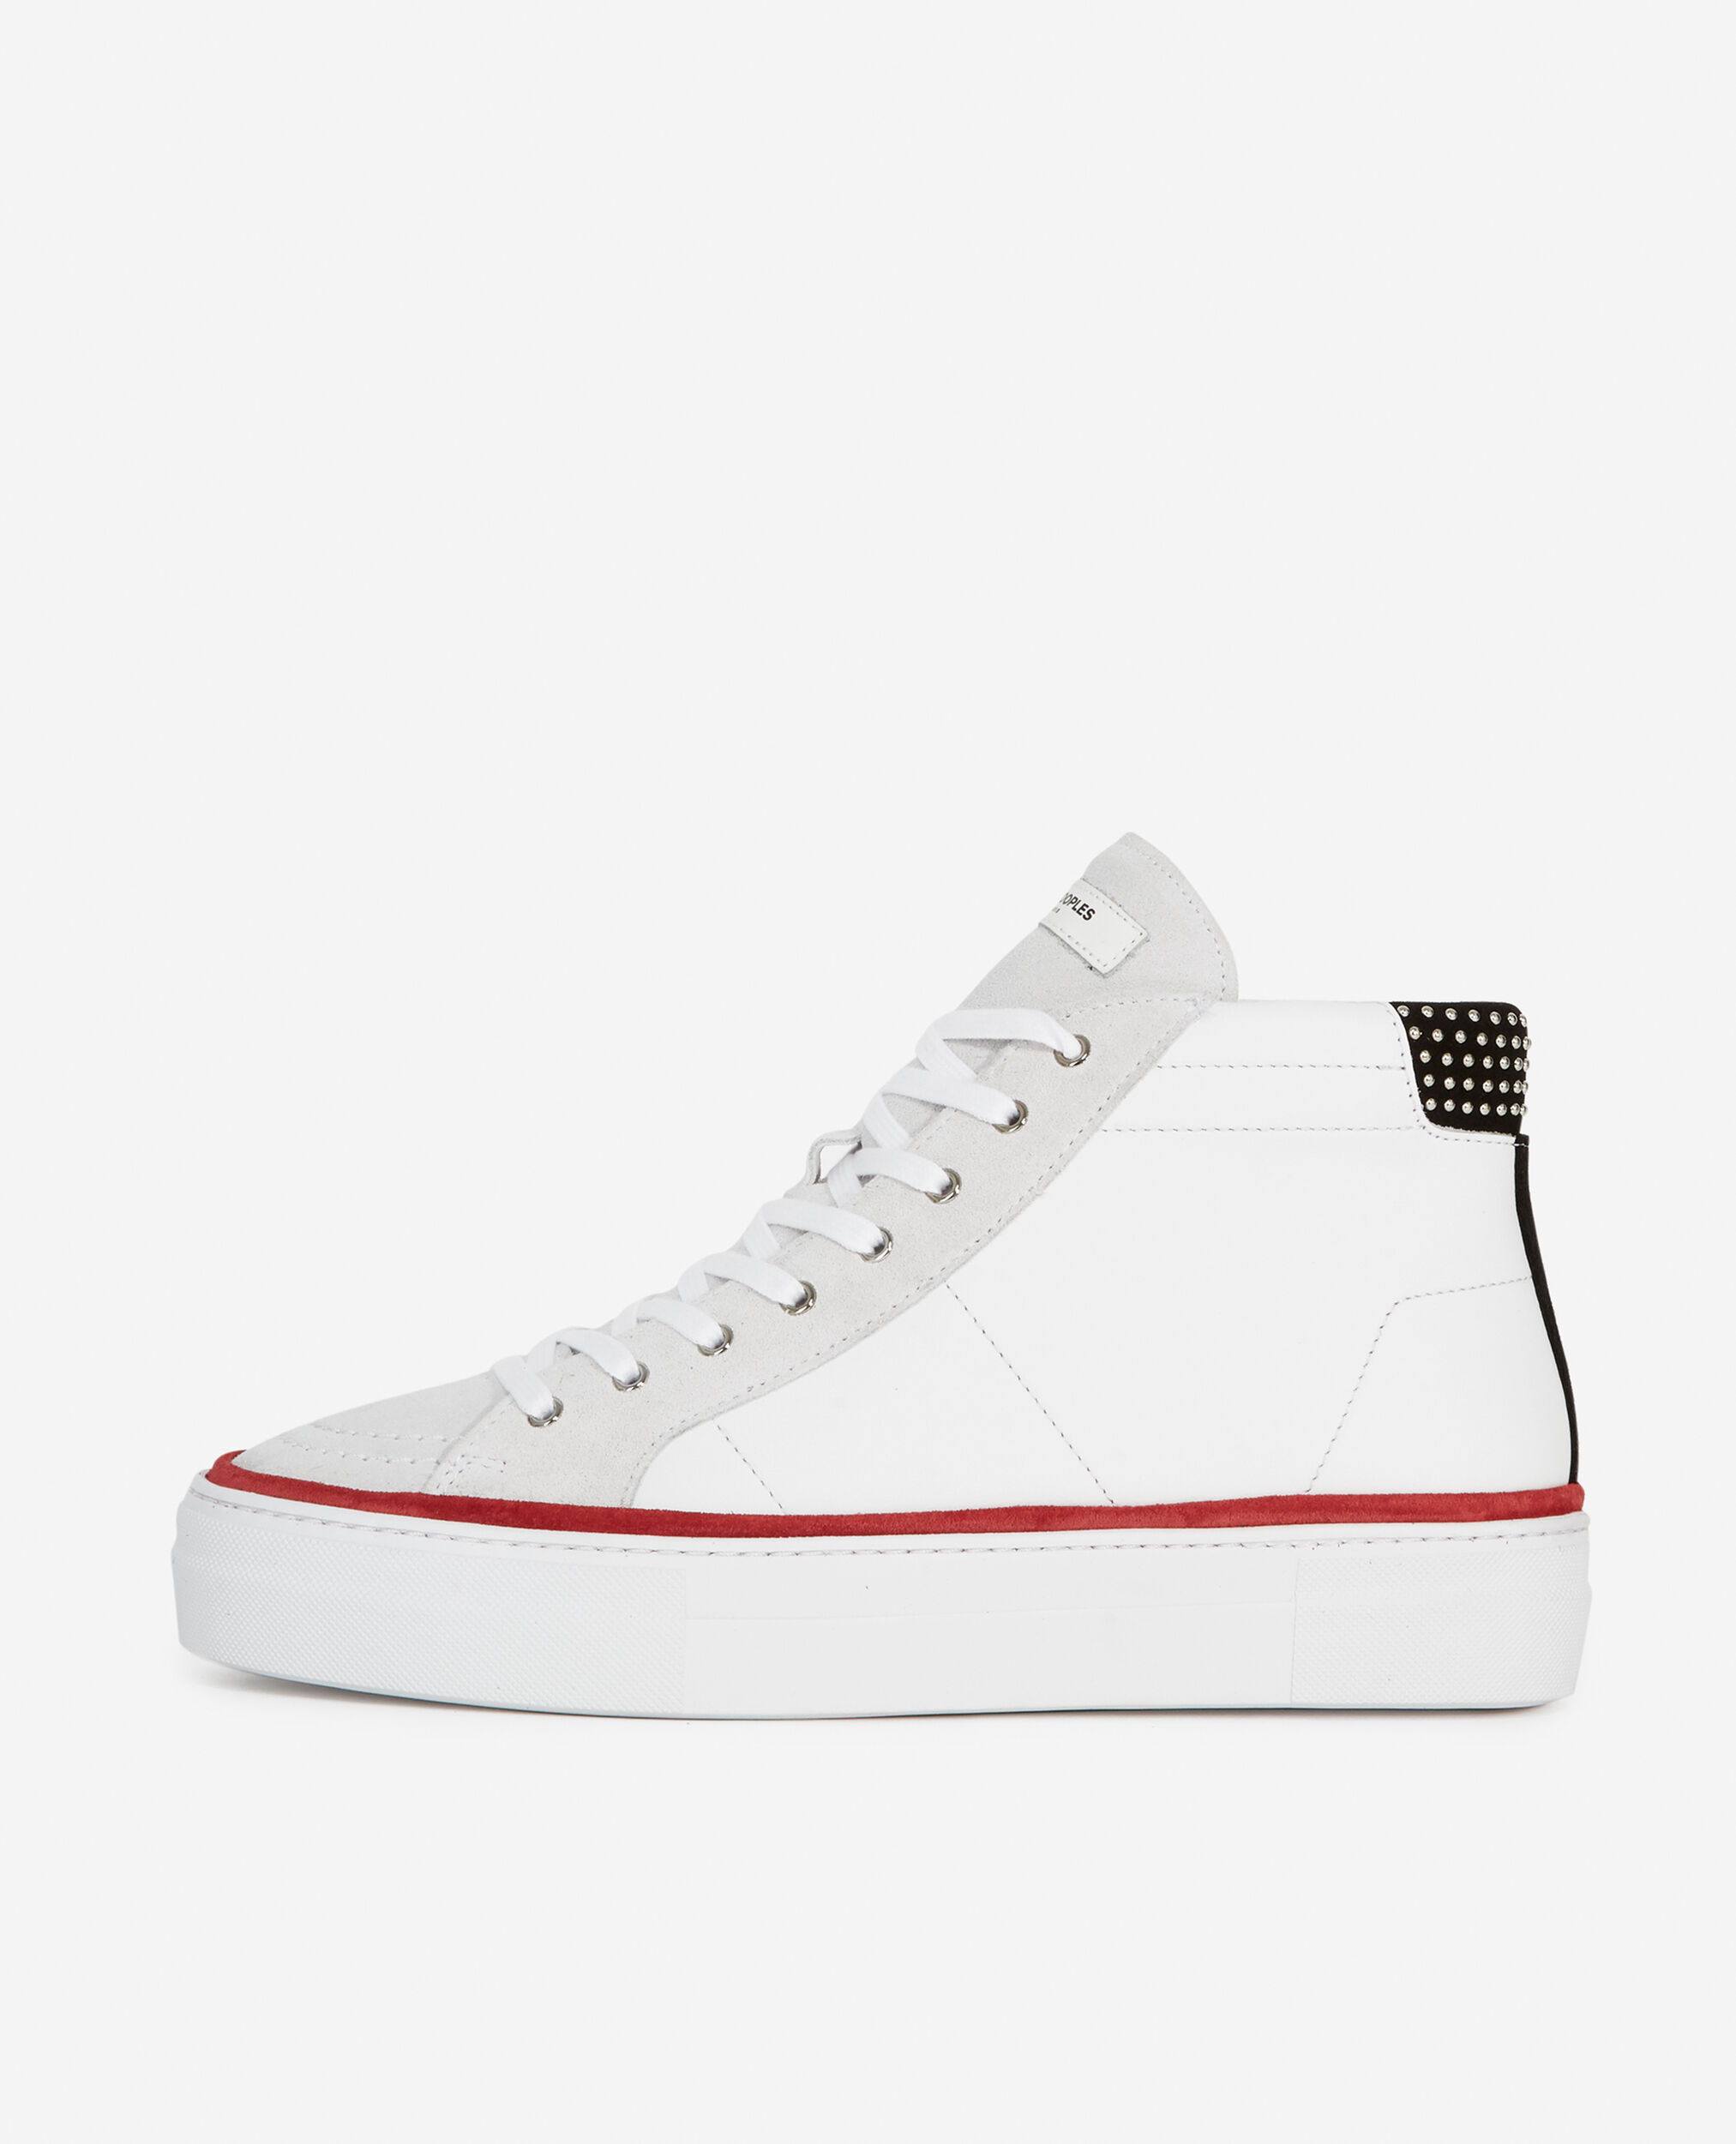 Turnschuhe weiß Leder Farbdetails, WHITE / GREY / RED, hi-res image number null